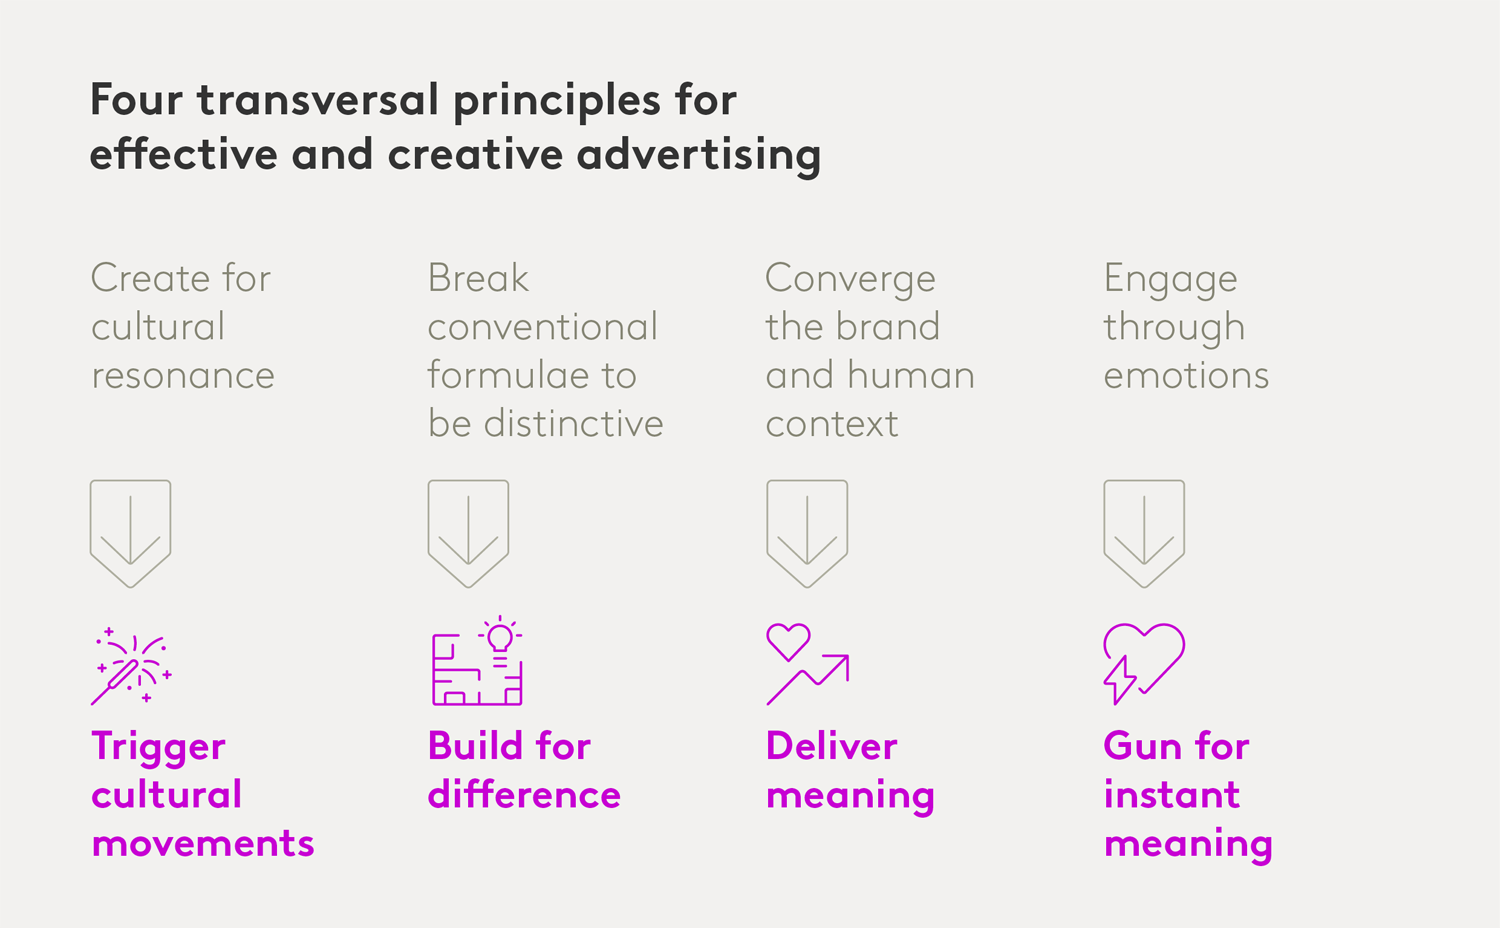 Four transversal principles for effective and creative advertising